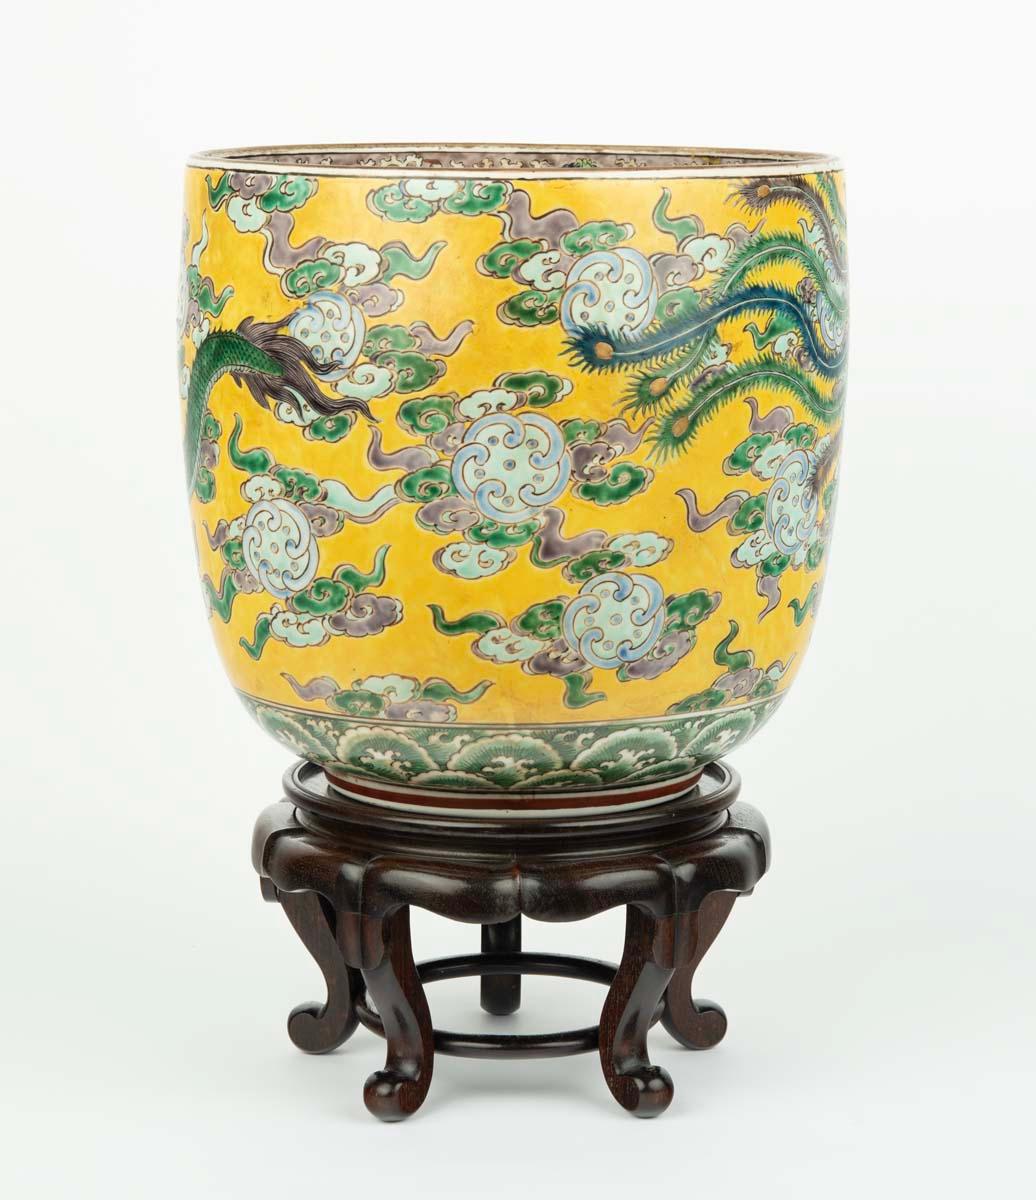 As part of our Japanese works of art collection we are delighted to offer this large Meiji Period (1868-1912), Kutani Jardiniere vibrantly decorated in famile verte coloured enamels, this large, useful and highly decorative plant pot is